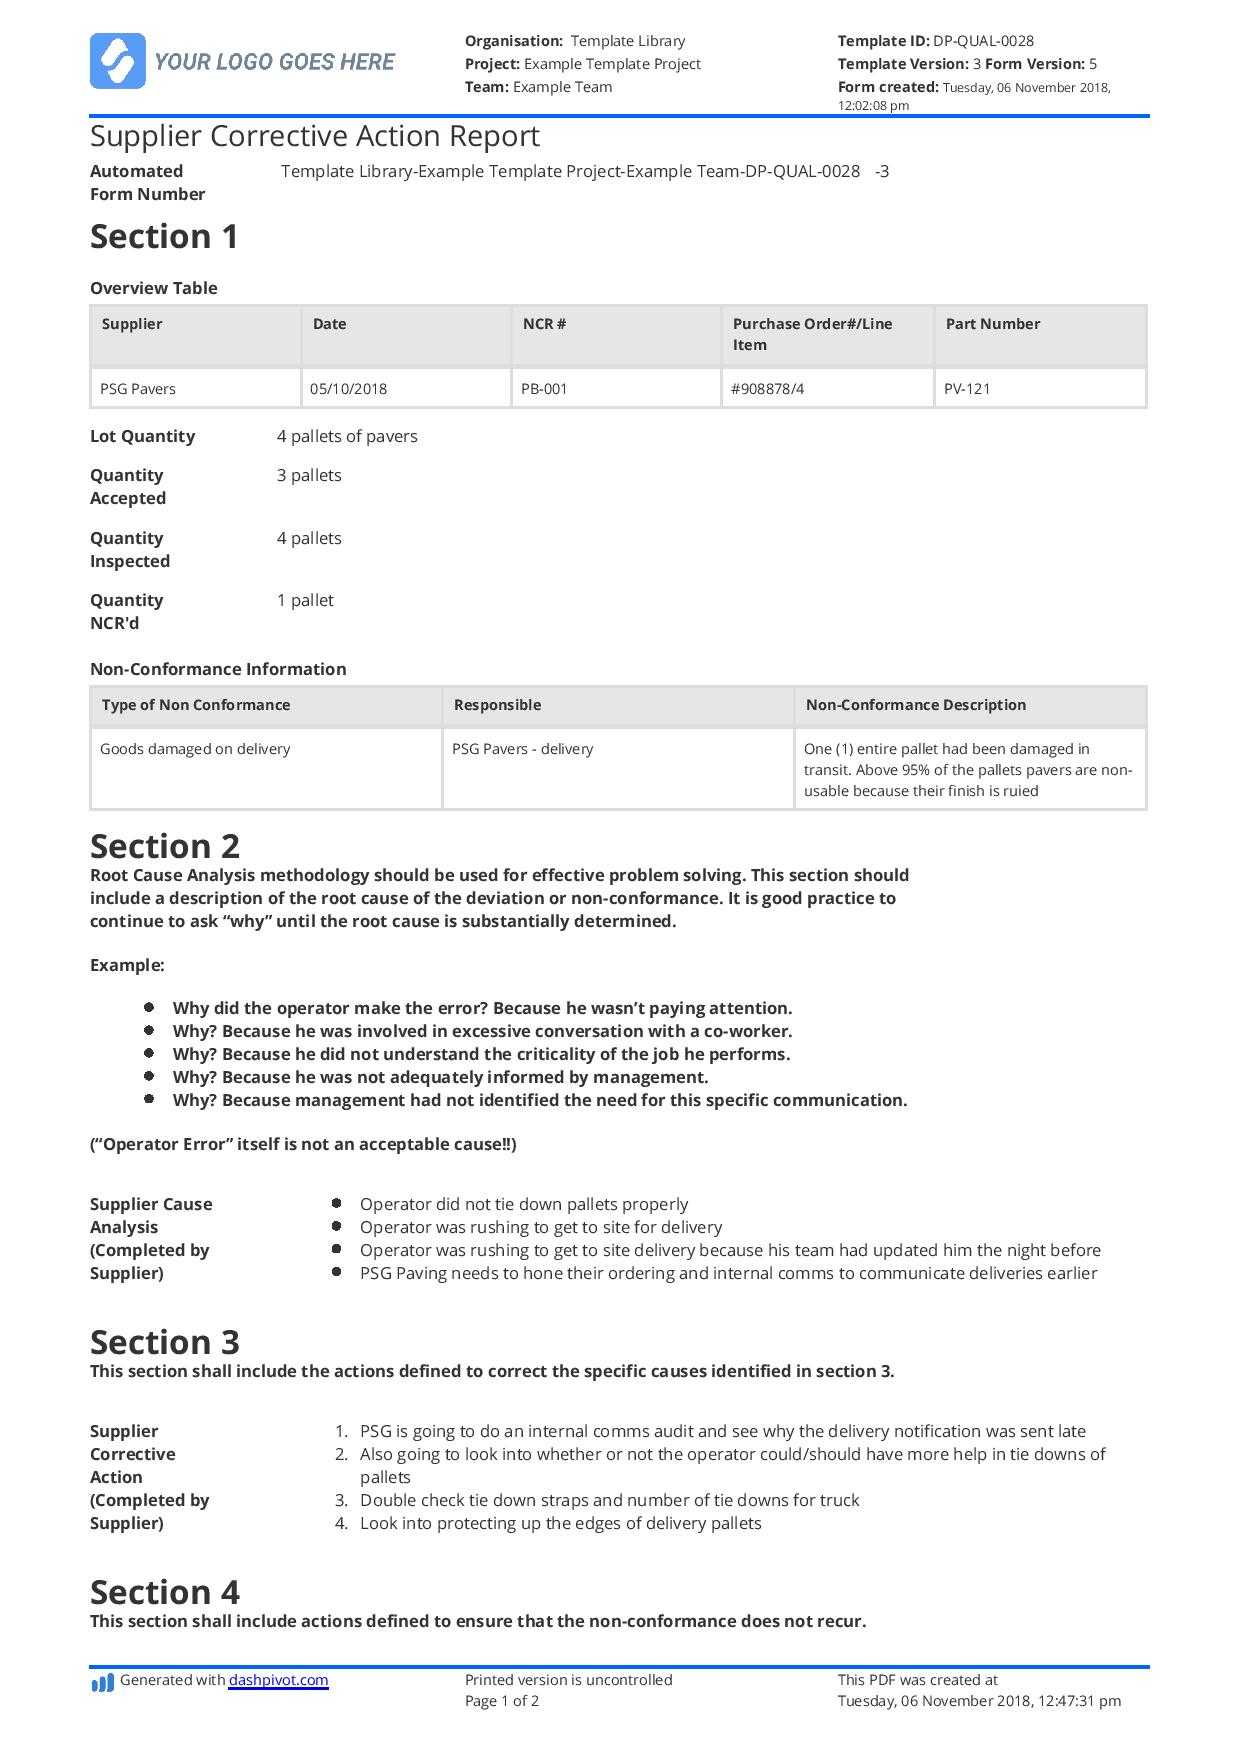 Supplier Corrective Action Report Template: Improve Your In Check Out Report Template